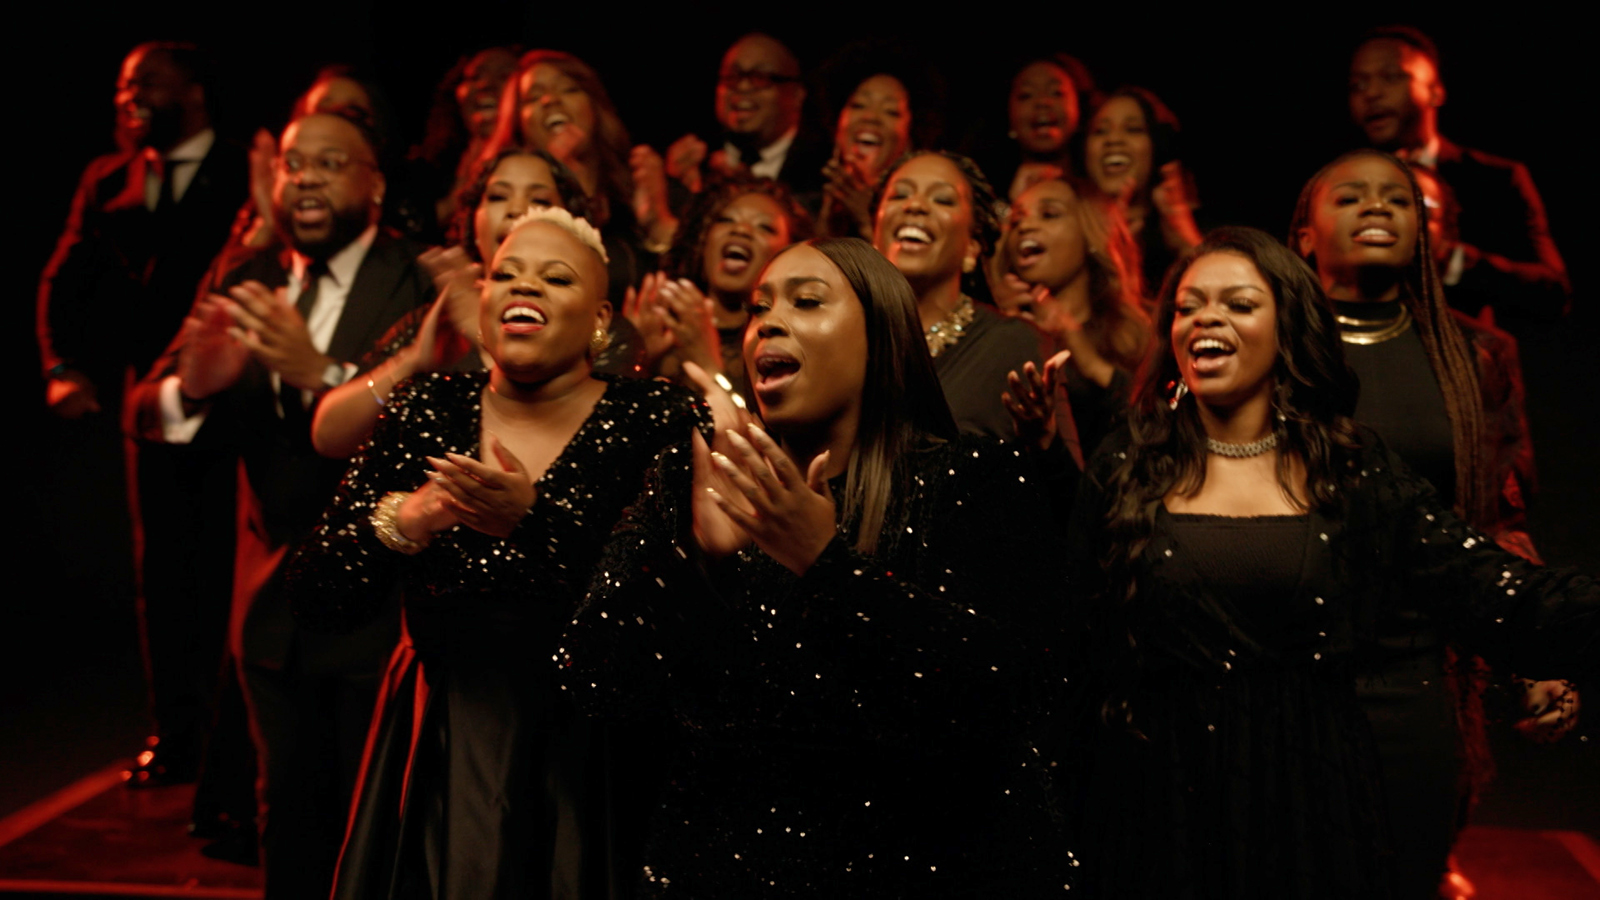 Tyrell Bell and the Belle Singers perform in “Gospel." (Photo courtesy PBS)